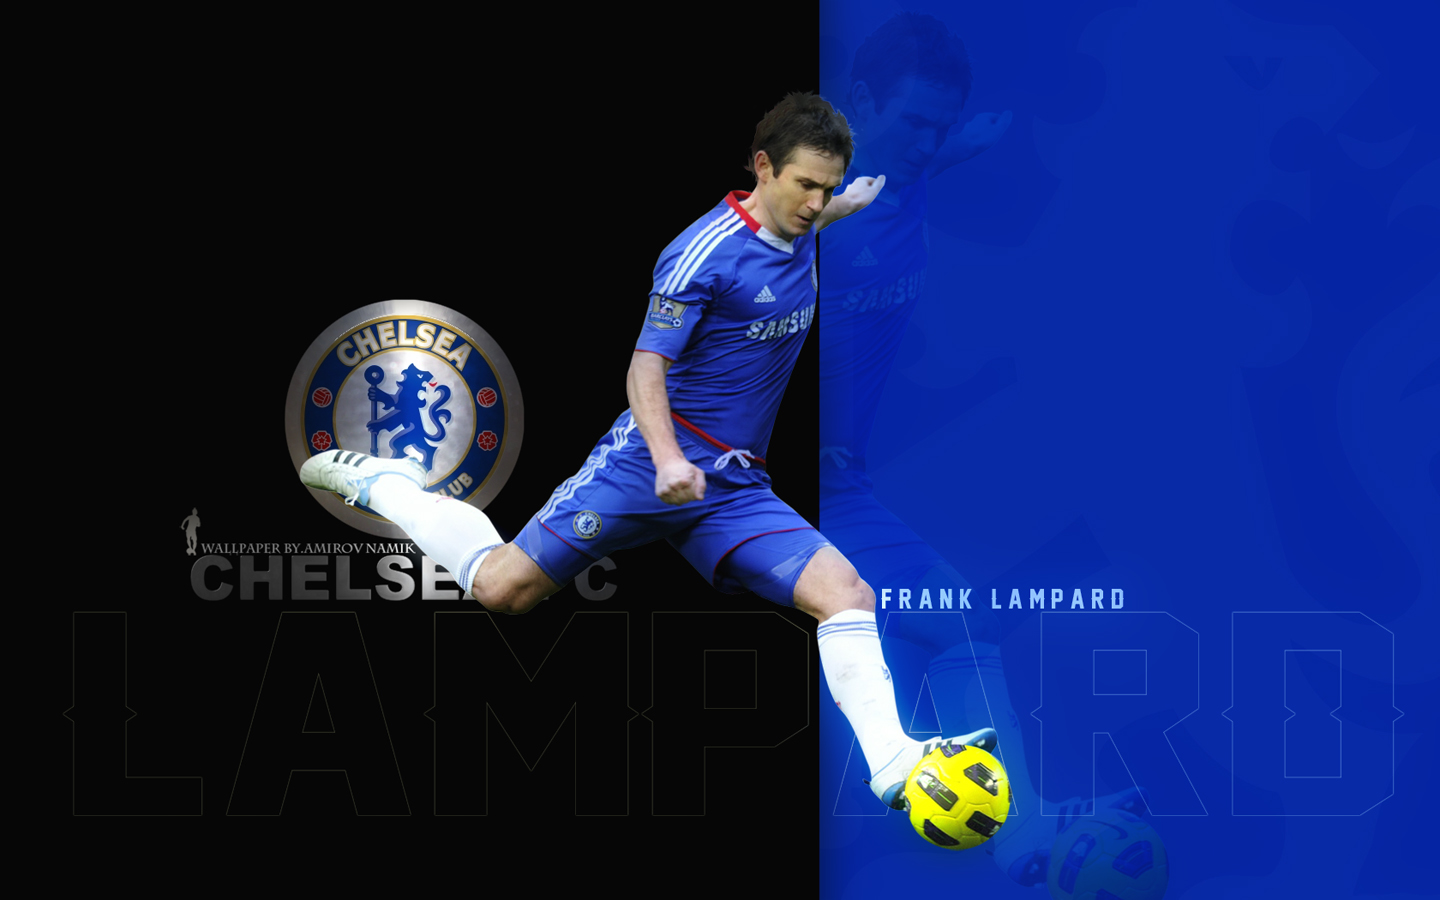 Frank Lampard Picture by Namik Amirov